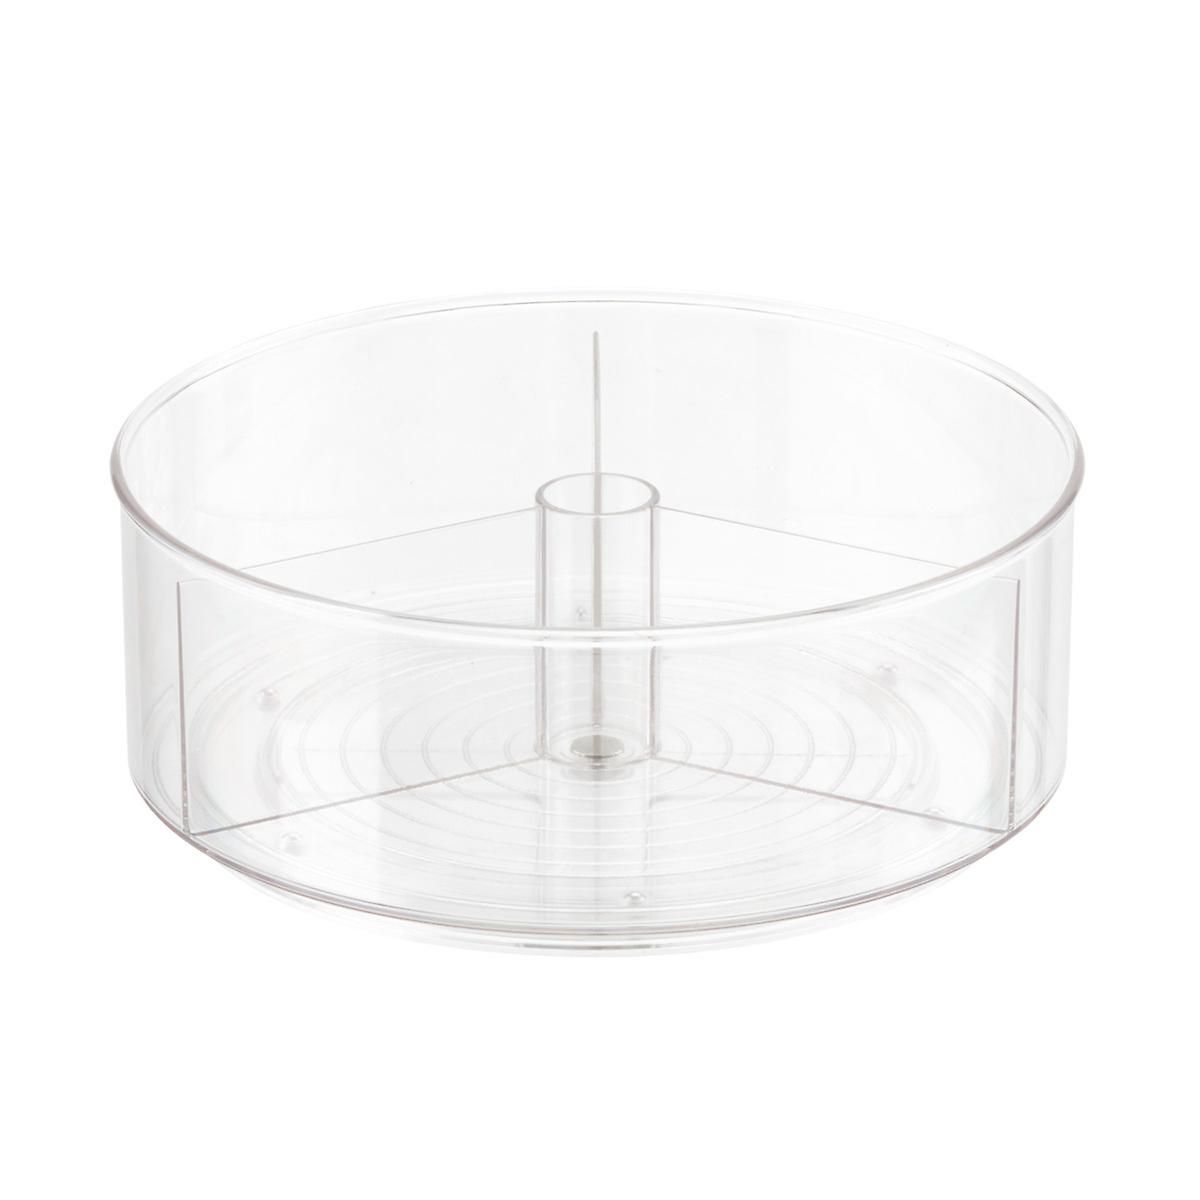 InterDesign Clear Linus Divided Lazy Susans | The Container Store